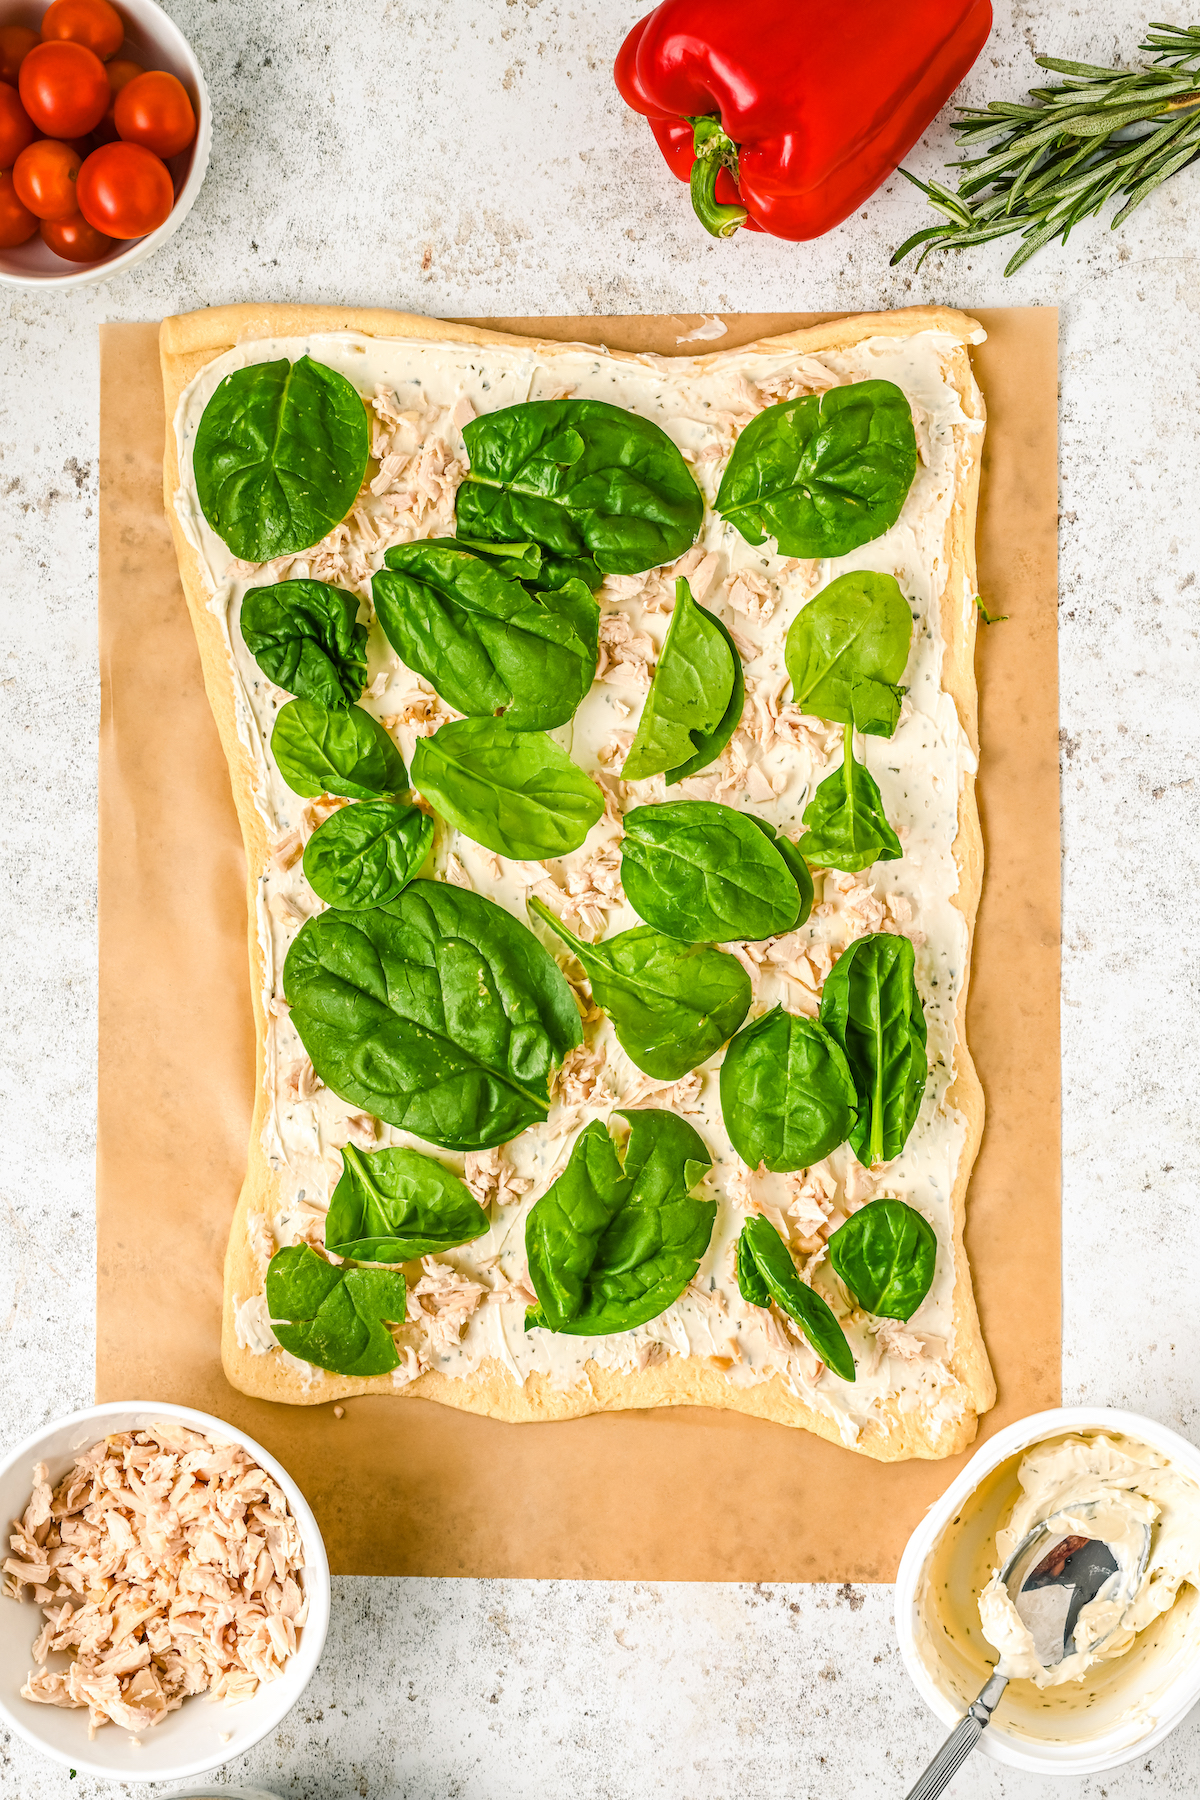 Spinach leaves laid over chicken and cream cheese on raw crescent dough.